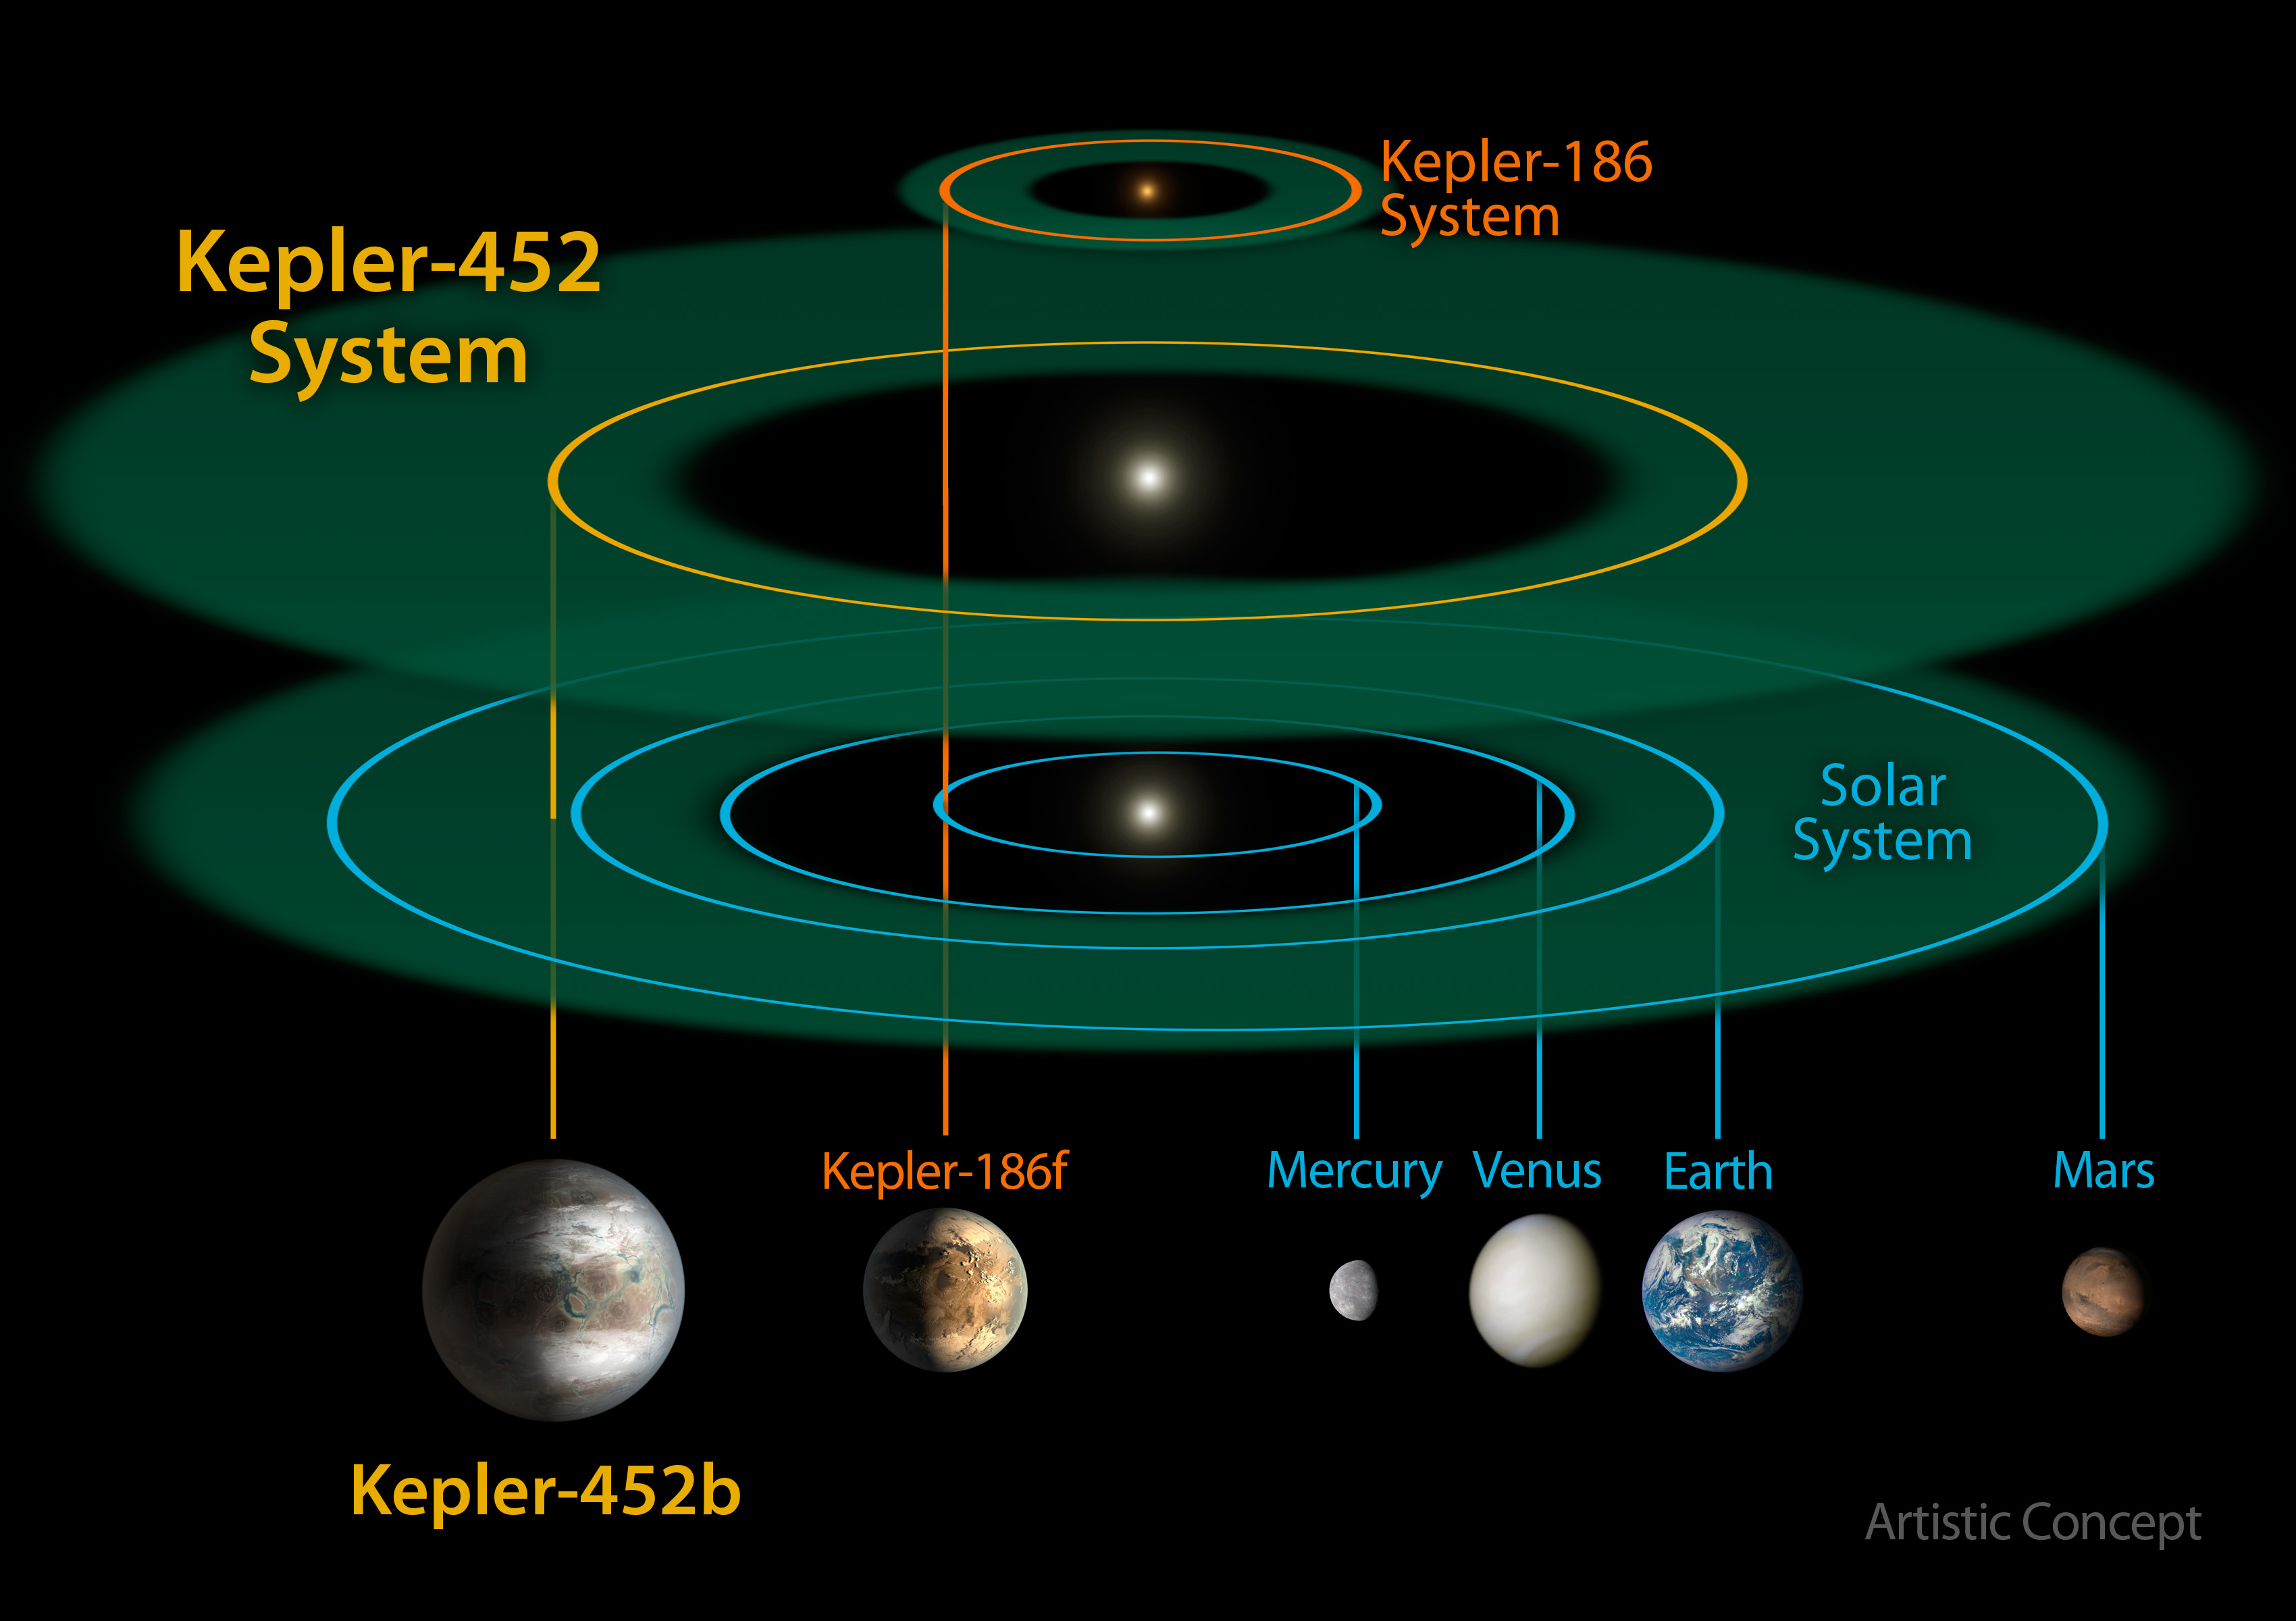 Graphic comparing our solar system and Kepler-452b's system